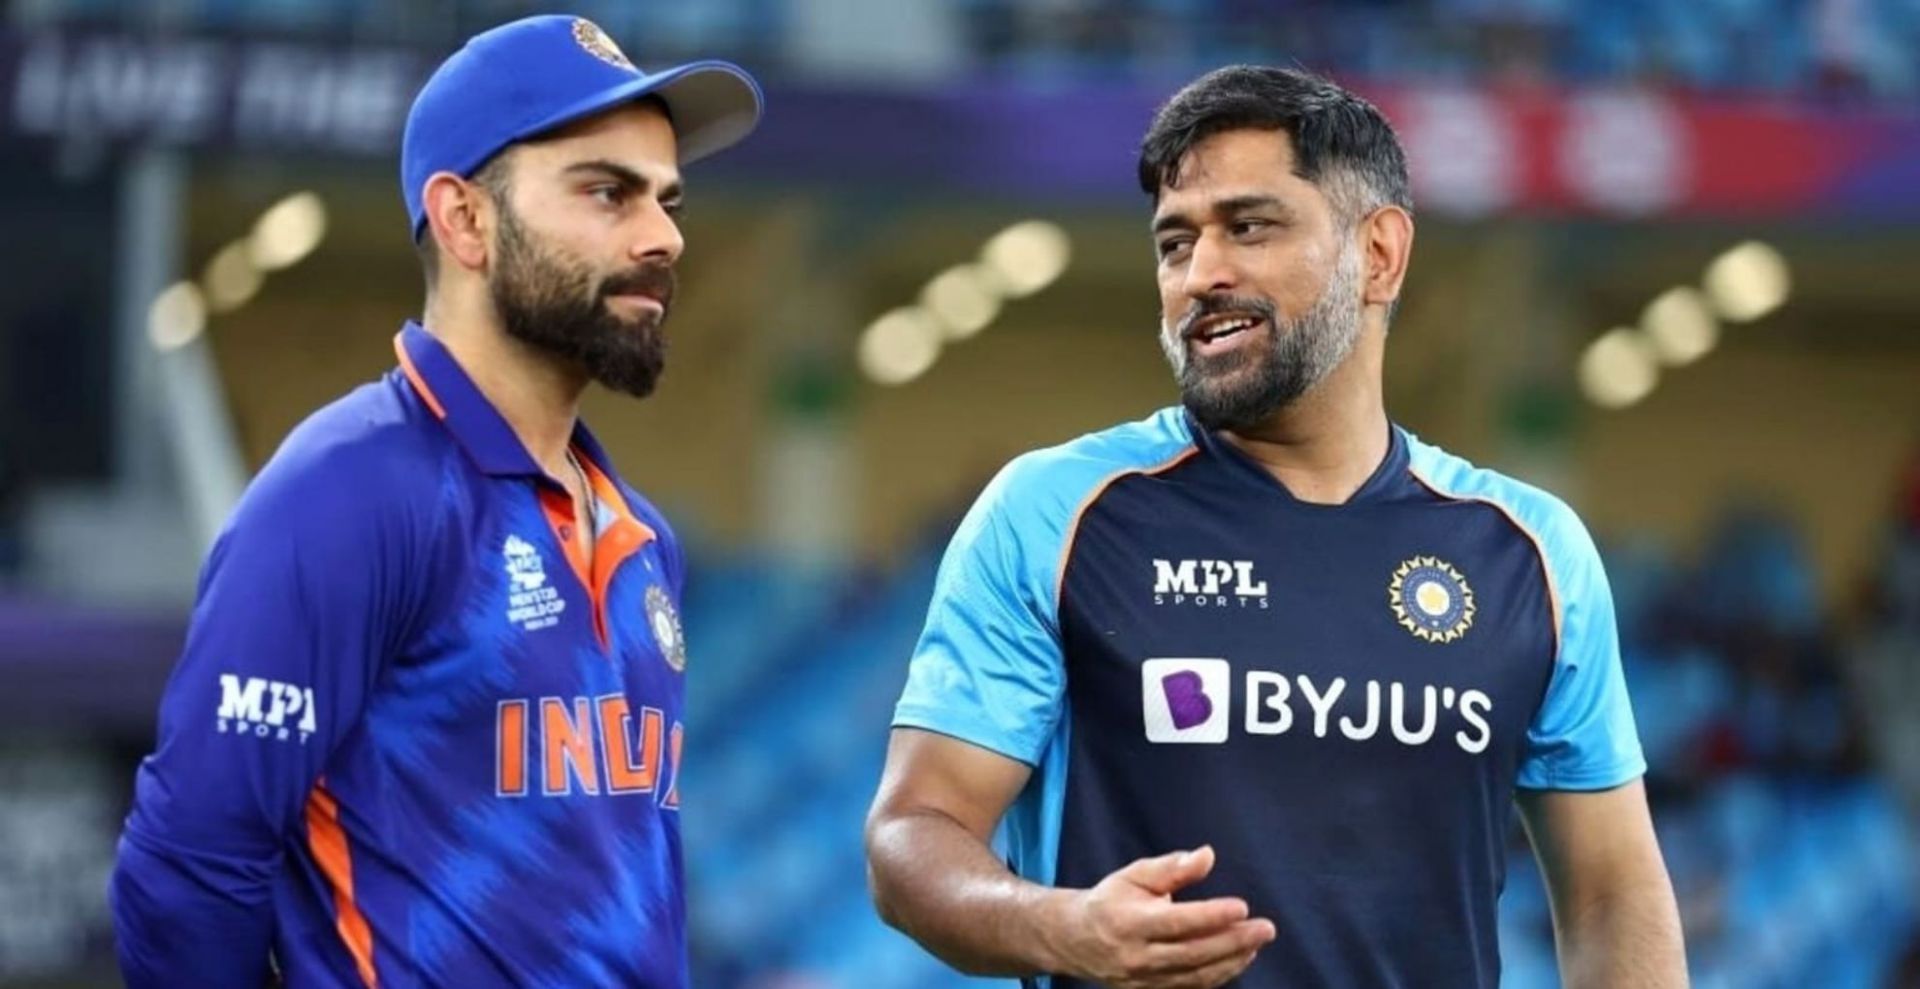 Virat Kohli (L) and MS Dhoni (R) share a great camaraderie both on and off the field.